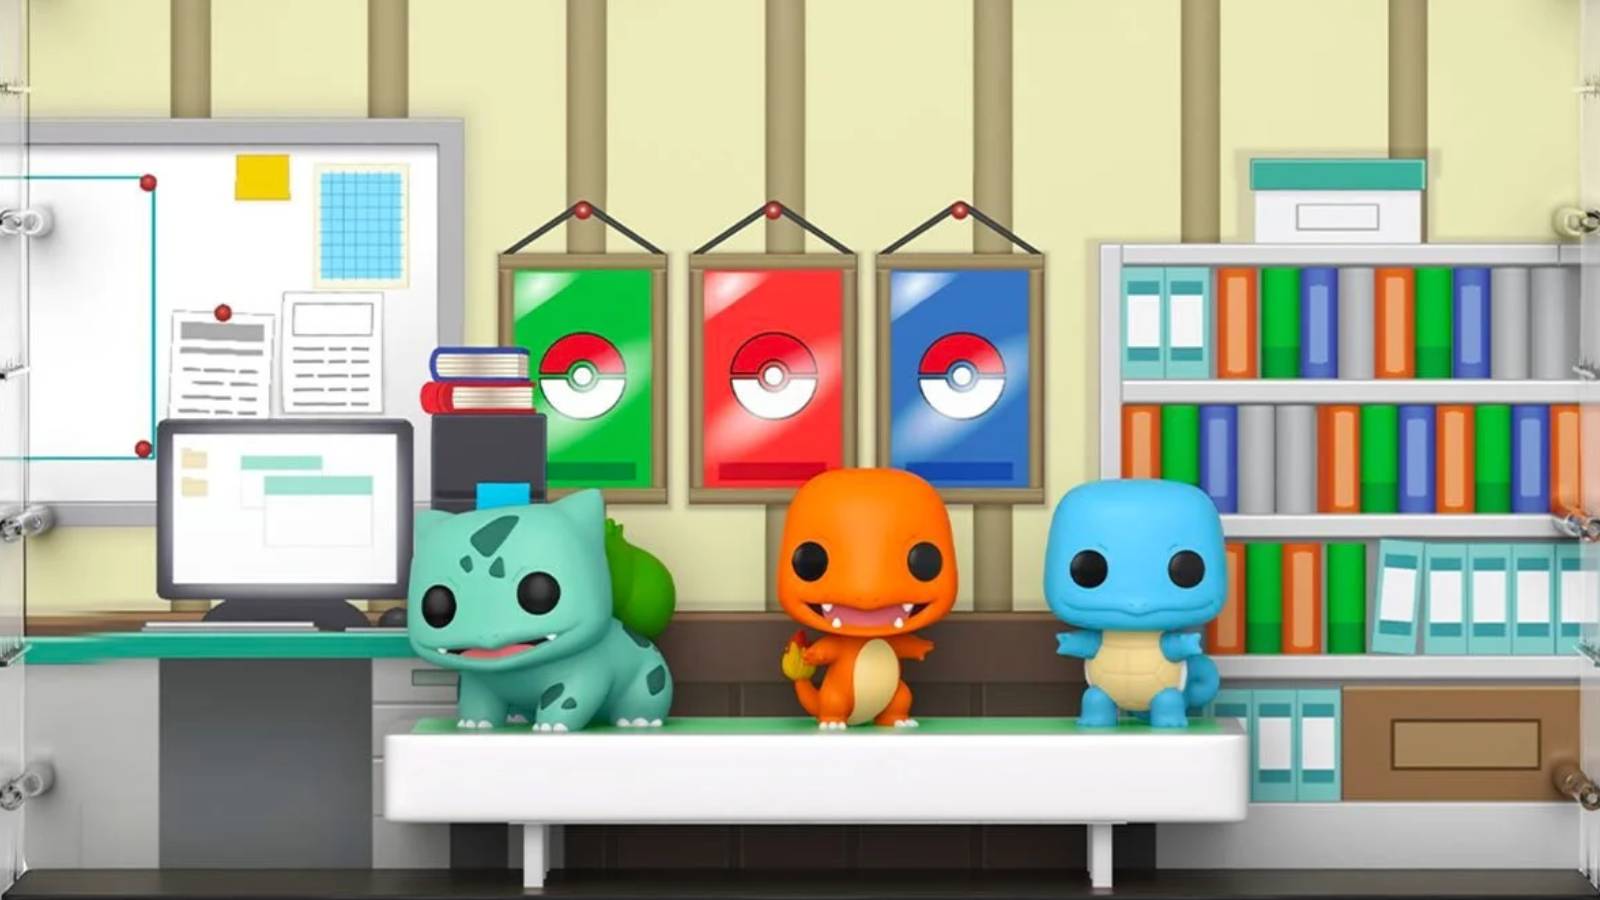 Funko Pop versions of Bulbasaur, Charmander, and Squirtle are all visible